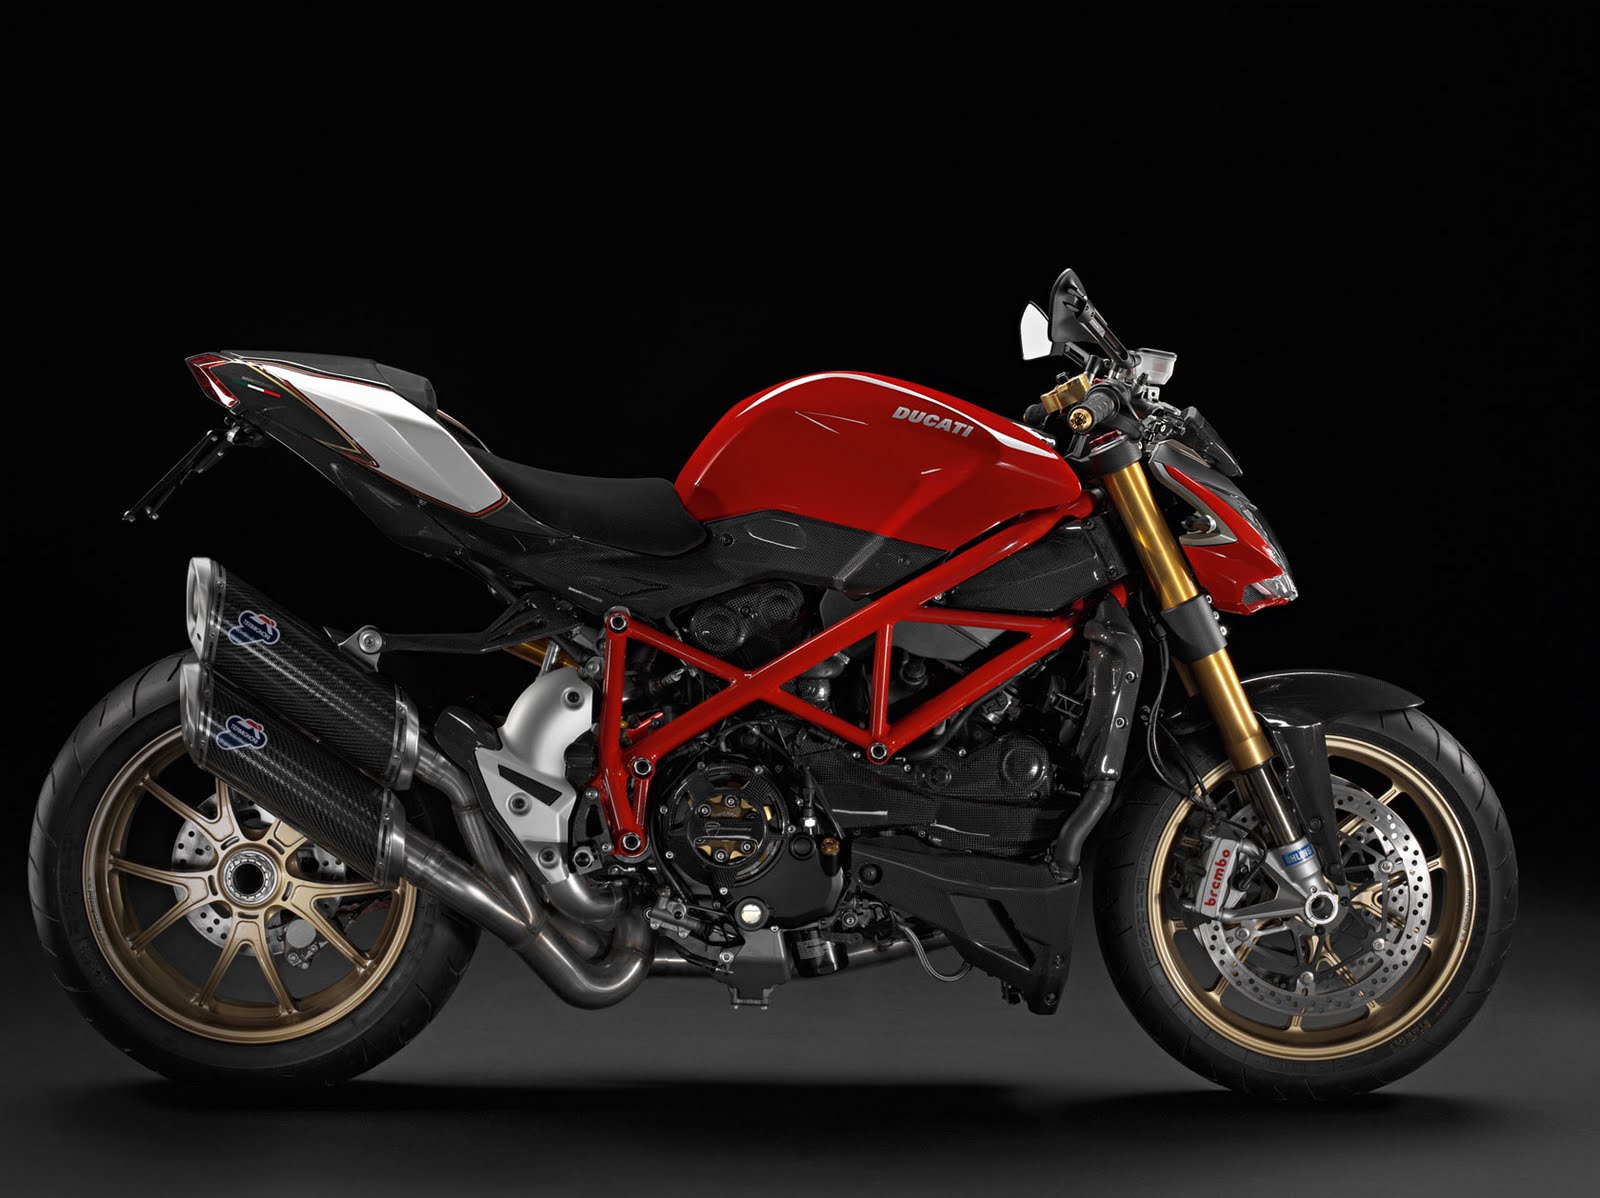 cool motorcycle 1000cc 2011 Ducati Streetfighter S Photo